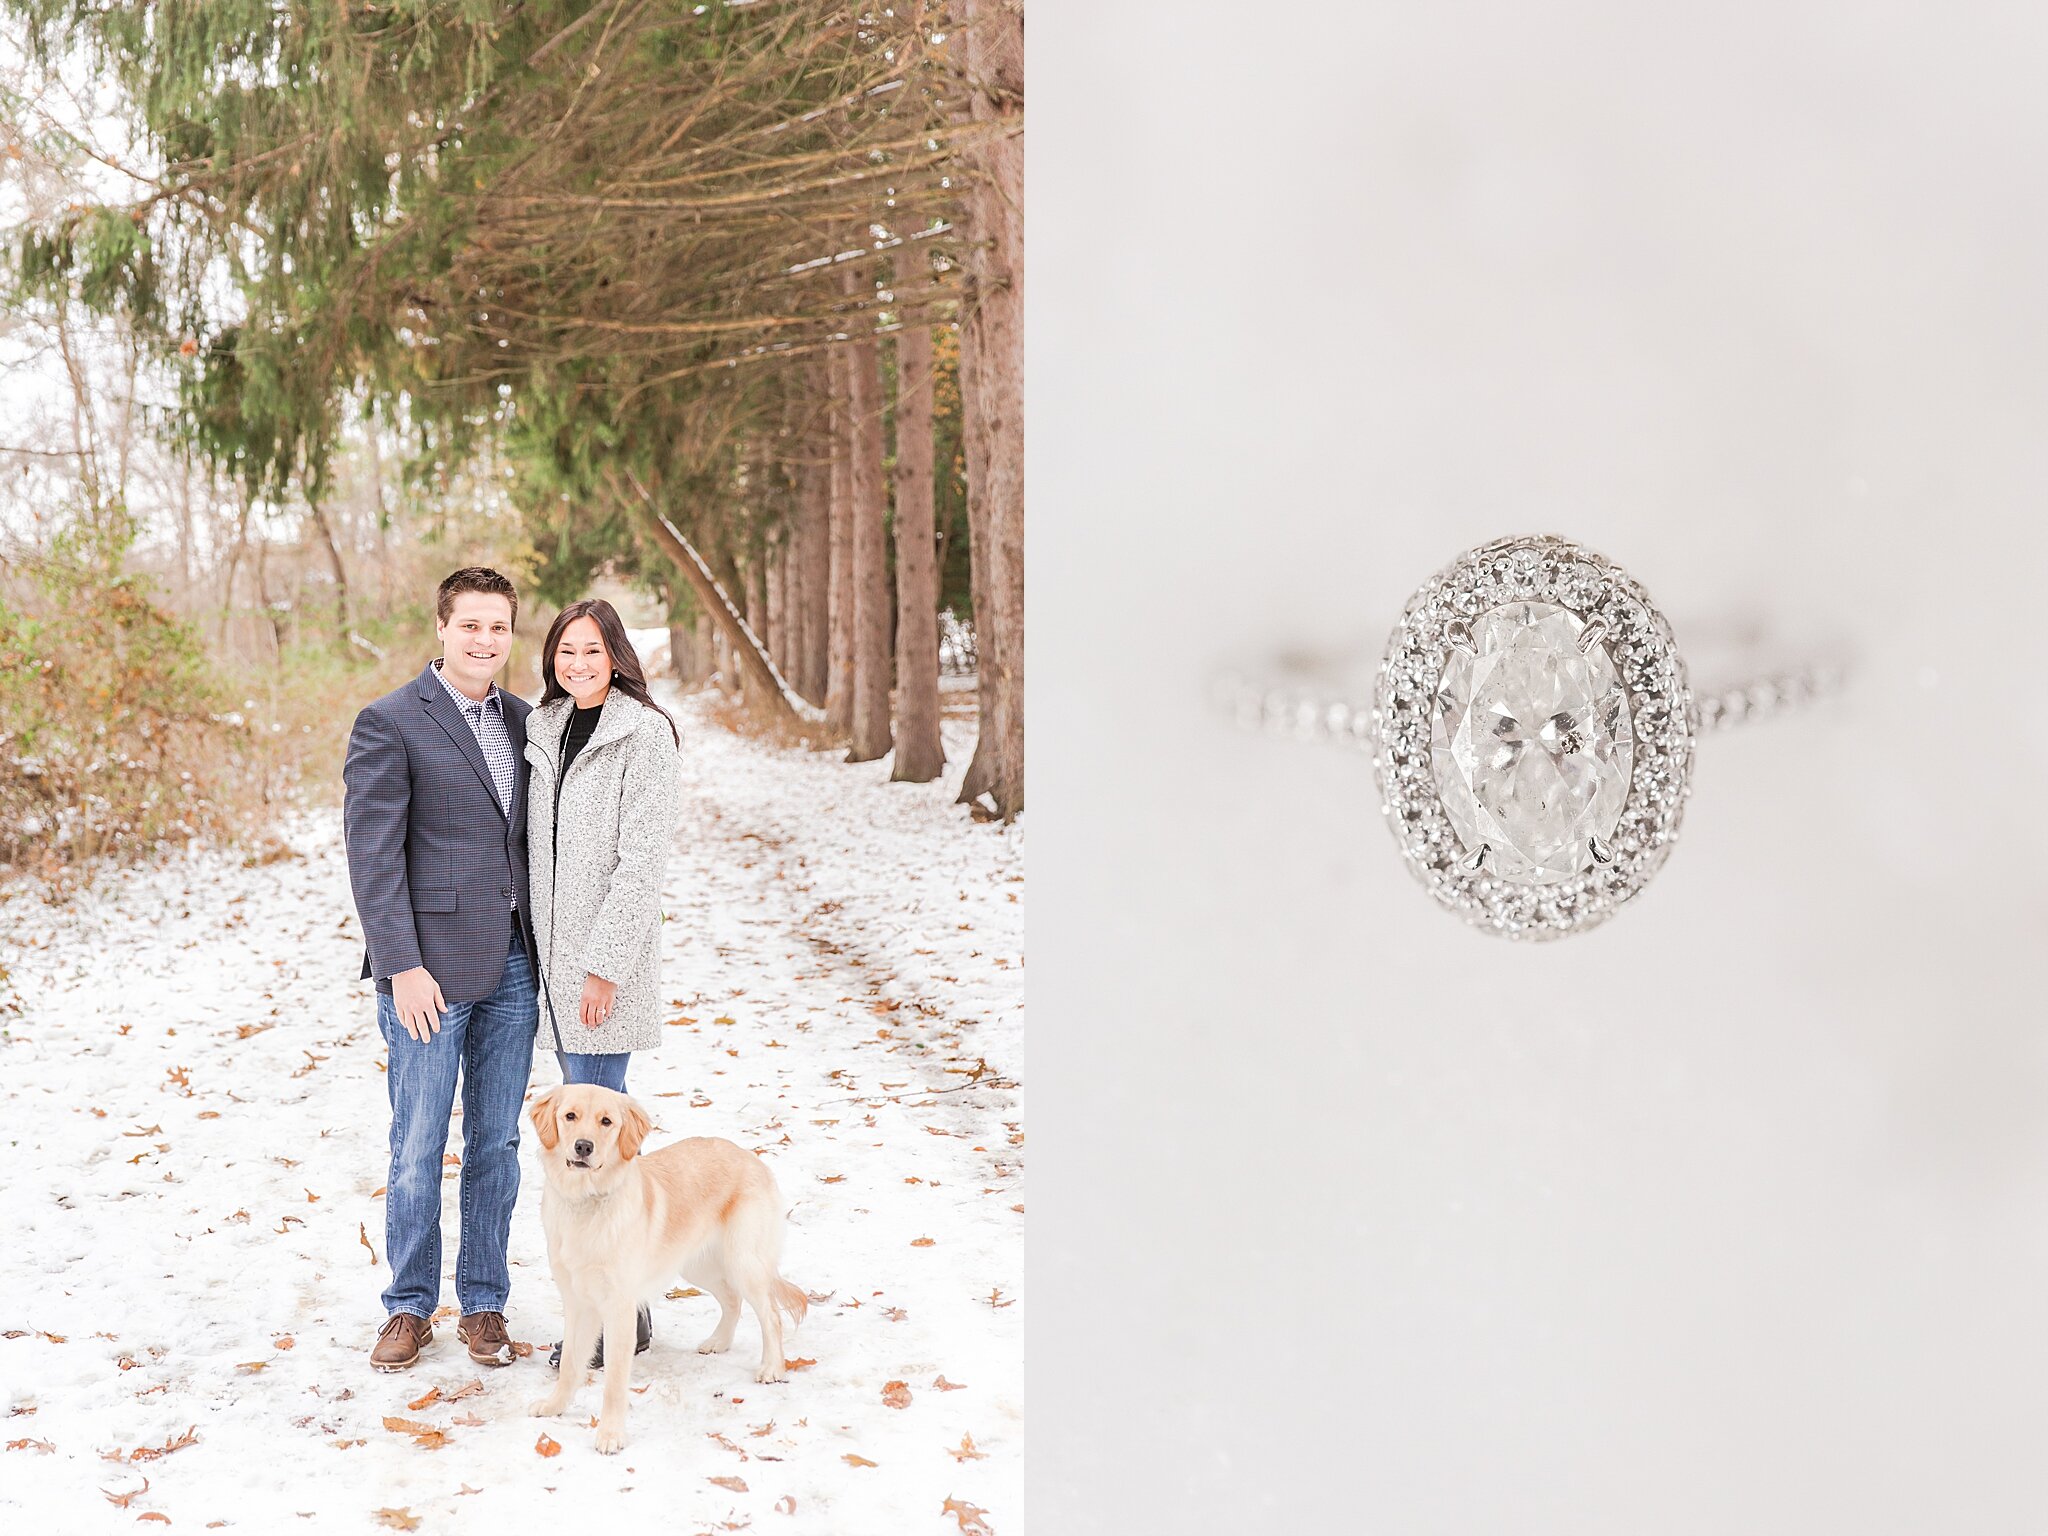 detroit-wedding-photographer-winter-engagement-photos-at-stony-creek-metropark-in-shelby-twp-mi-by-courtney-carolyn-photography_0003.jpg